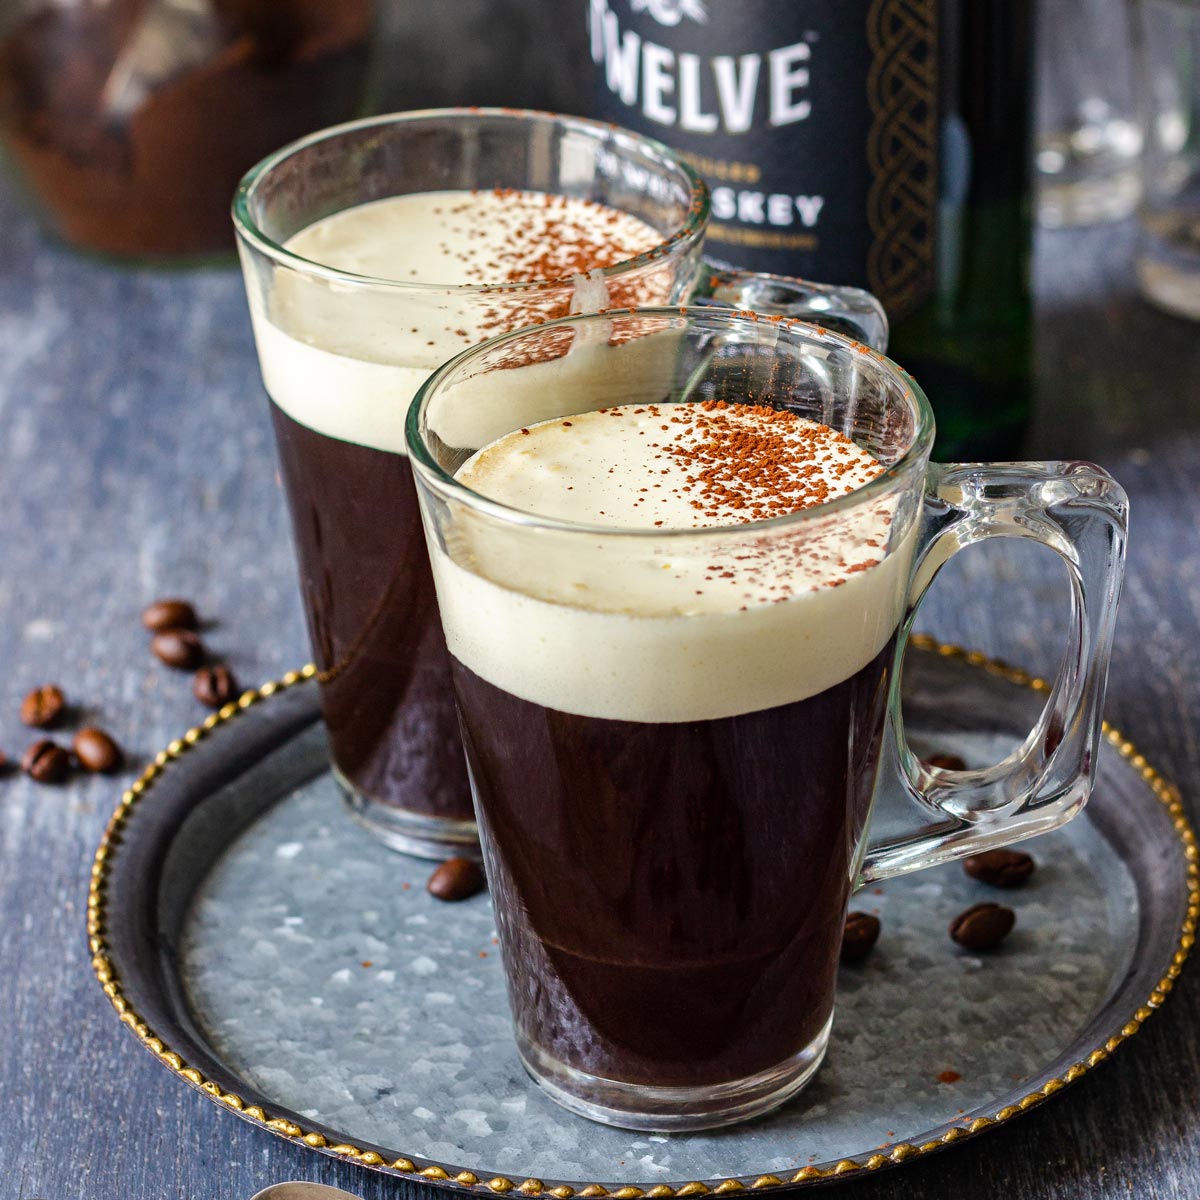 Having an #IrishTraveller #Irish #IrishCoffee with #whisky listening to #IrishMusic on YouTube #MP @BarrySheerman #LabourParty we ask the question #IrelandForAll doesn't have an issue with raw sewage release #TorySewageParty scandal have they got better diet visit toilet less UK!